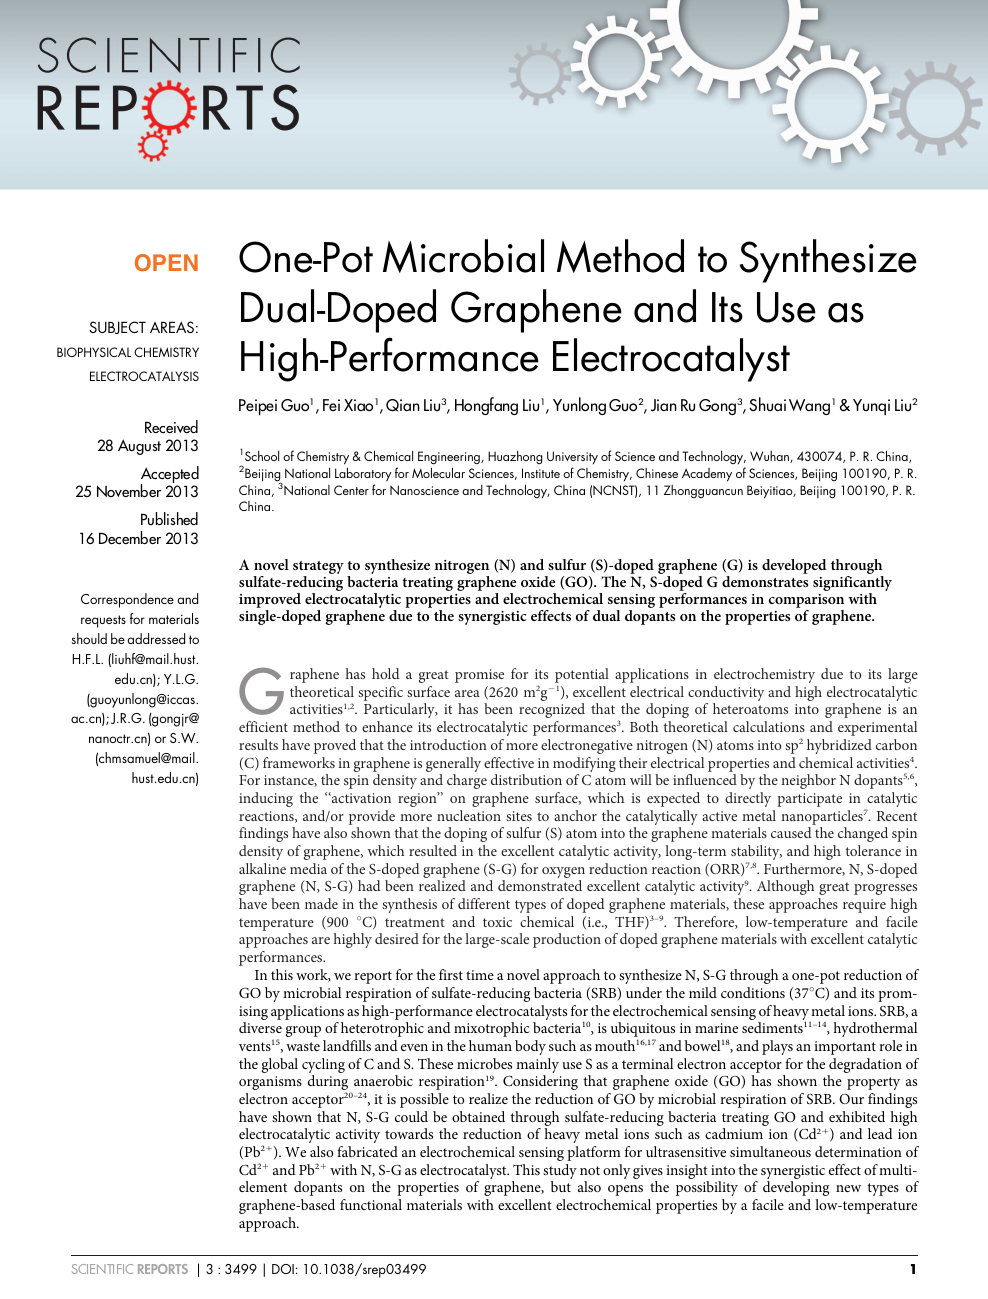 One Pot Microbial Method To Synthesize Dual Doped Graphene And Its Use As High Performance Electrocatalyst Topic Of Research Paper In Nano Technology Download Scholarly Article Pdf And Read For Free On Cyberleninka Open Science